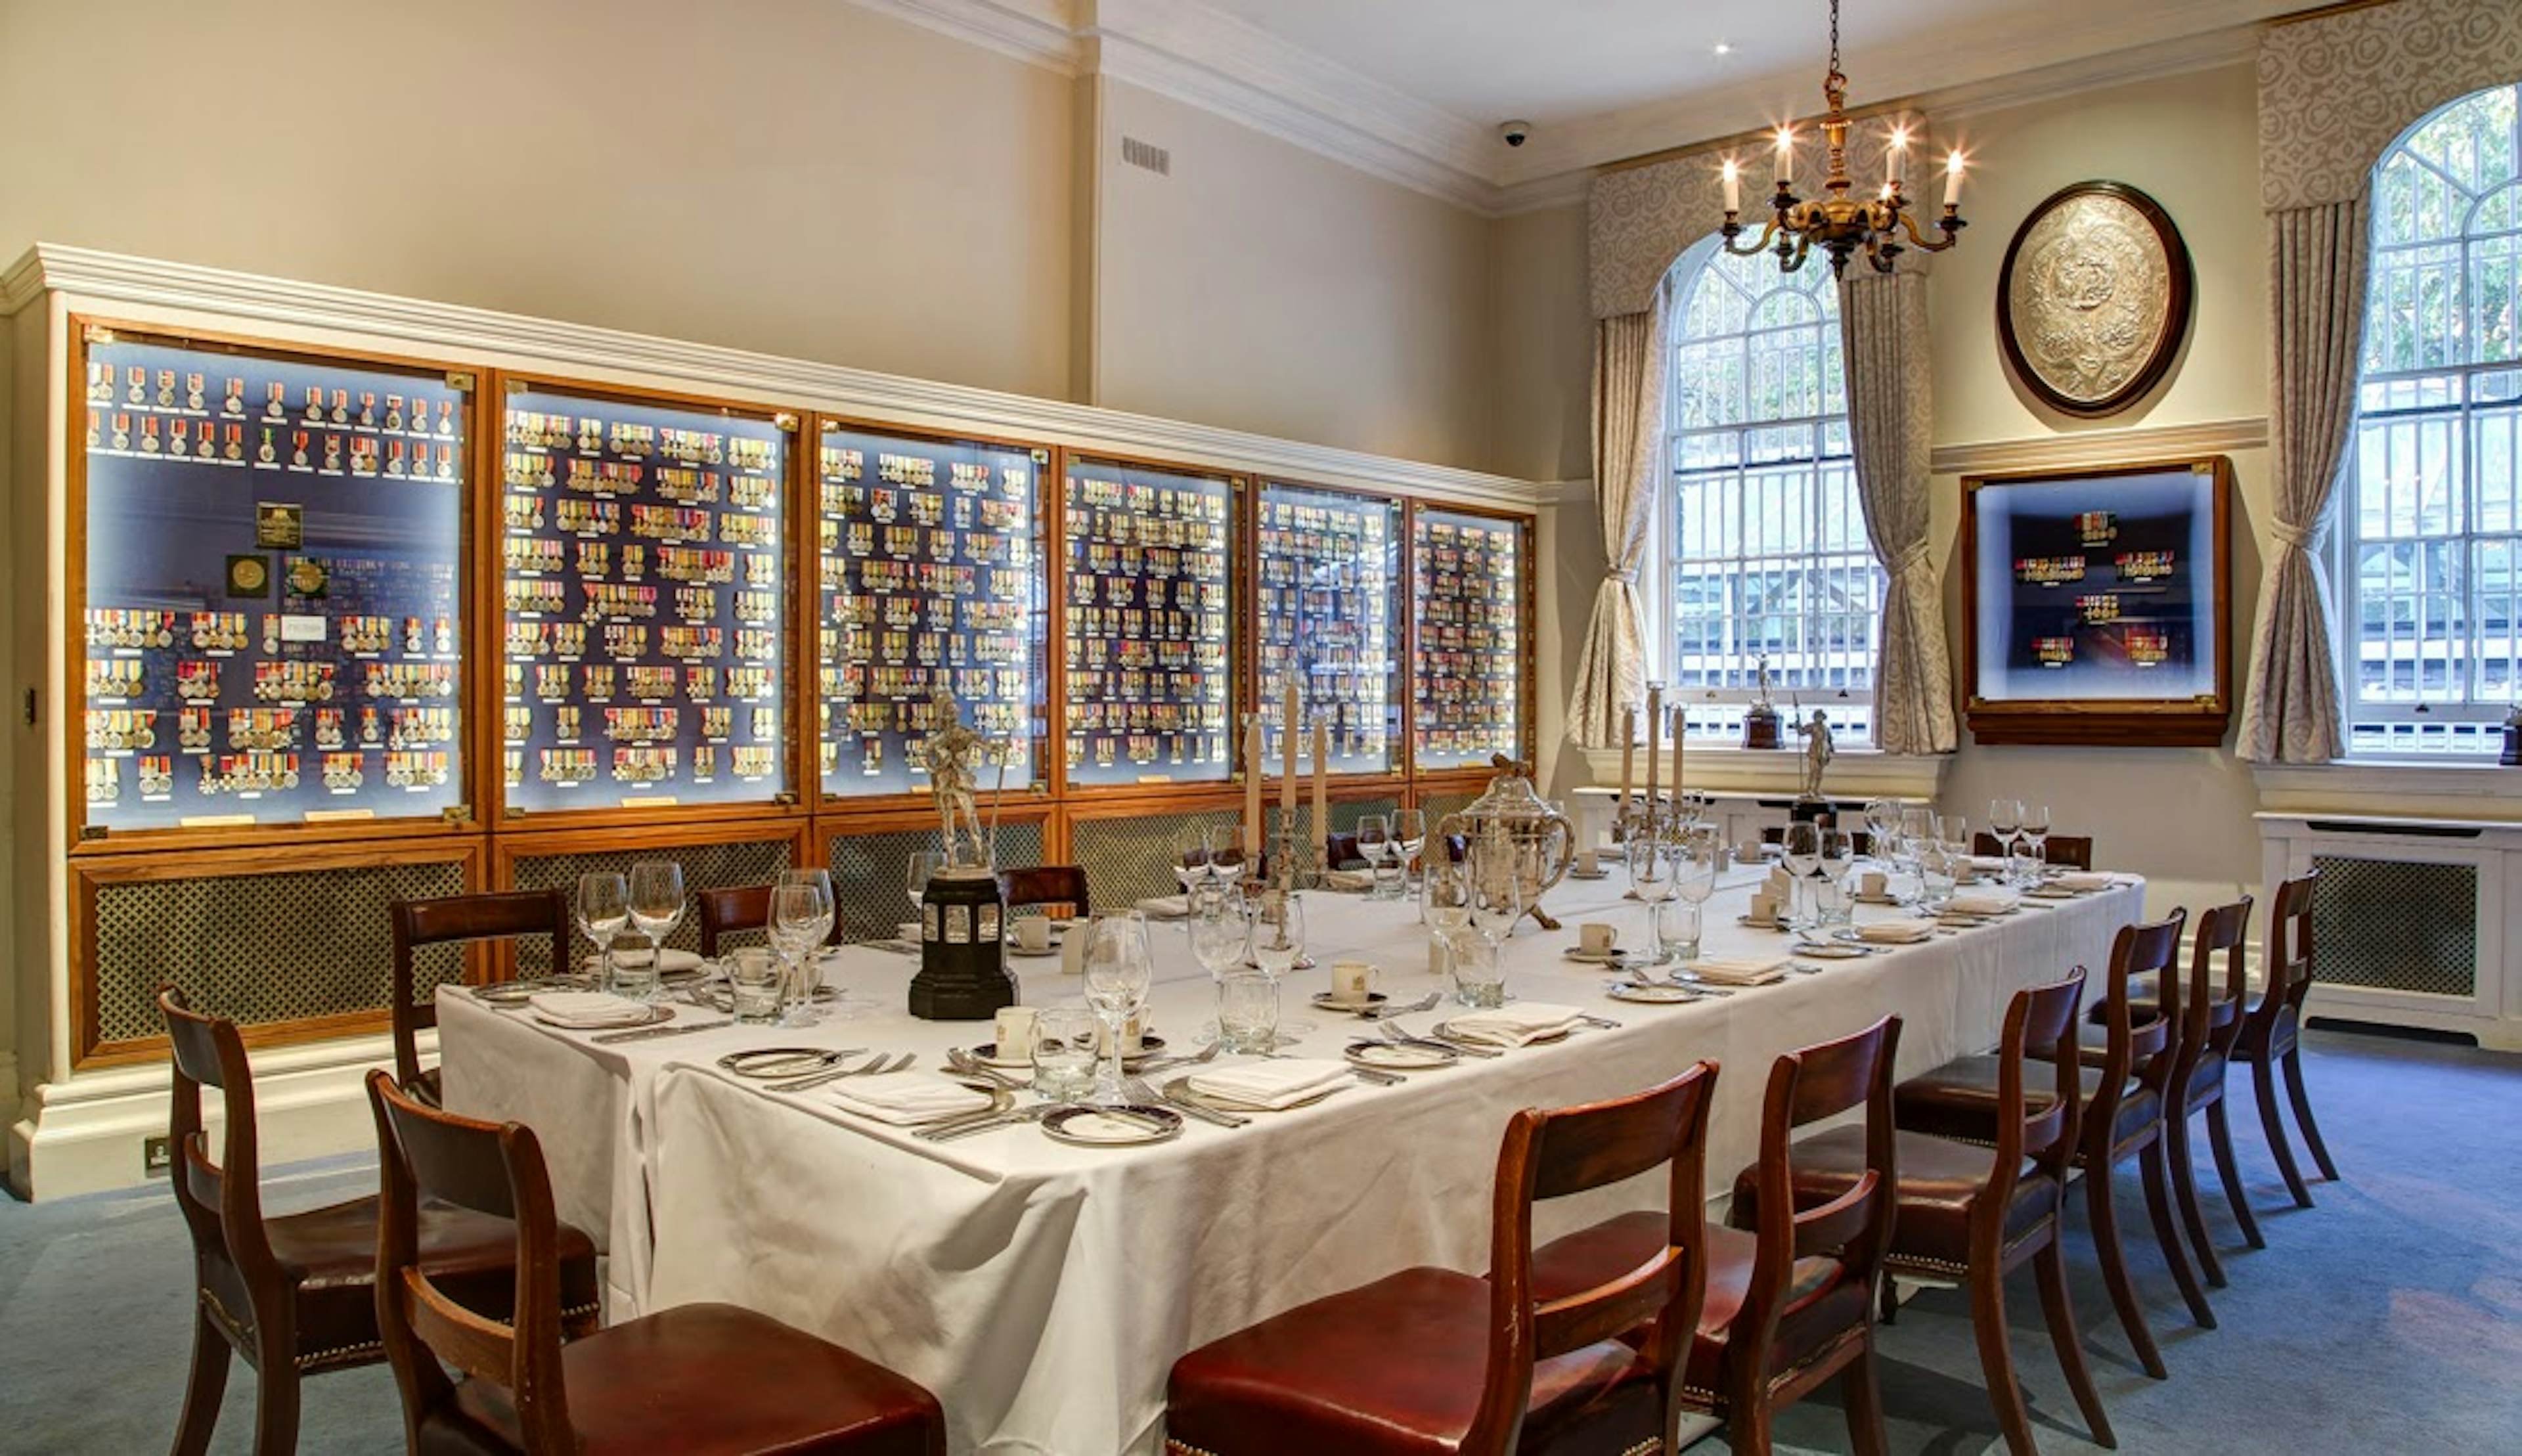 The HAC (Honourable Artillery Company) - Medal Room image 1